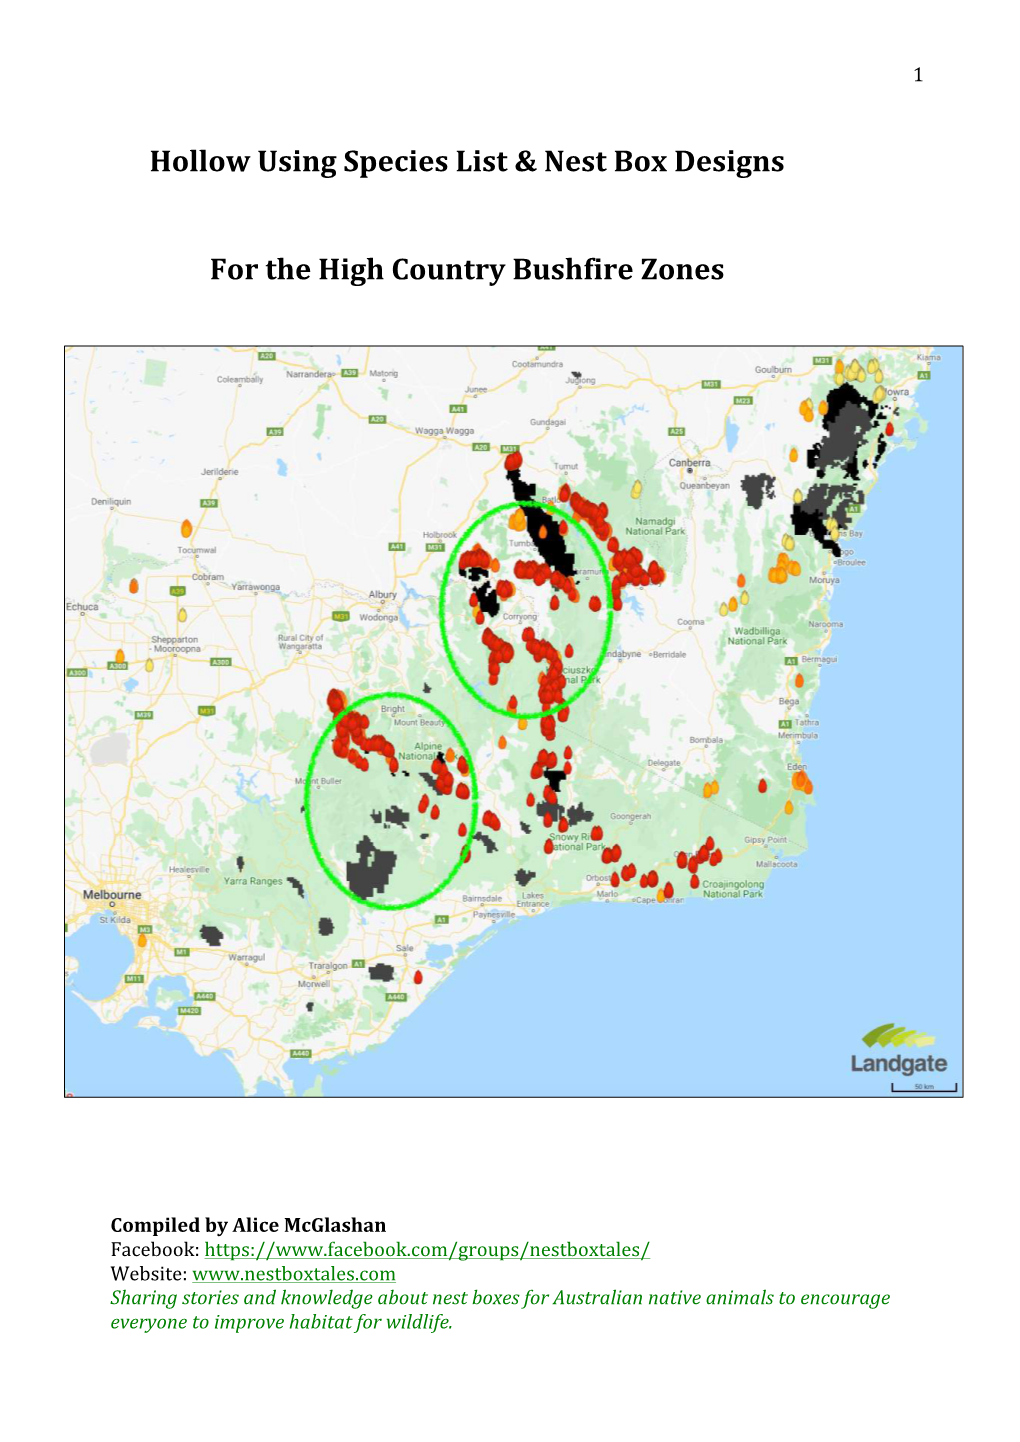 Hollow Using Species List & Nest Box Designs for the High Country Bushfire Zones